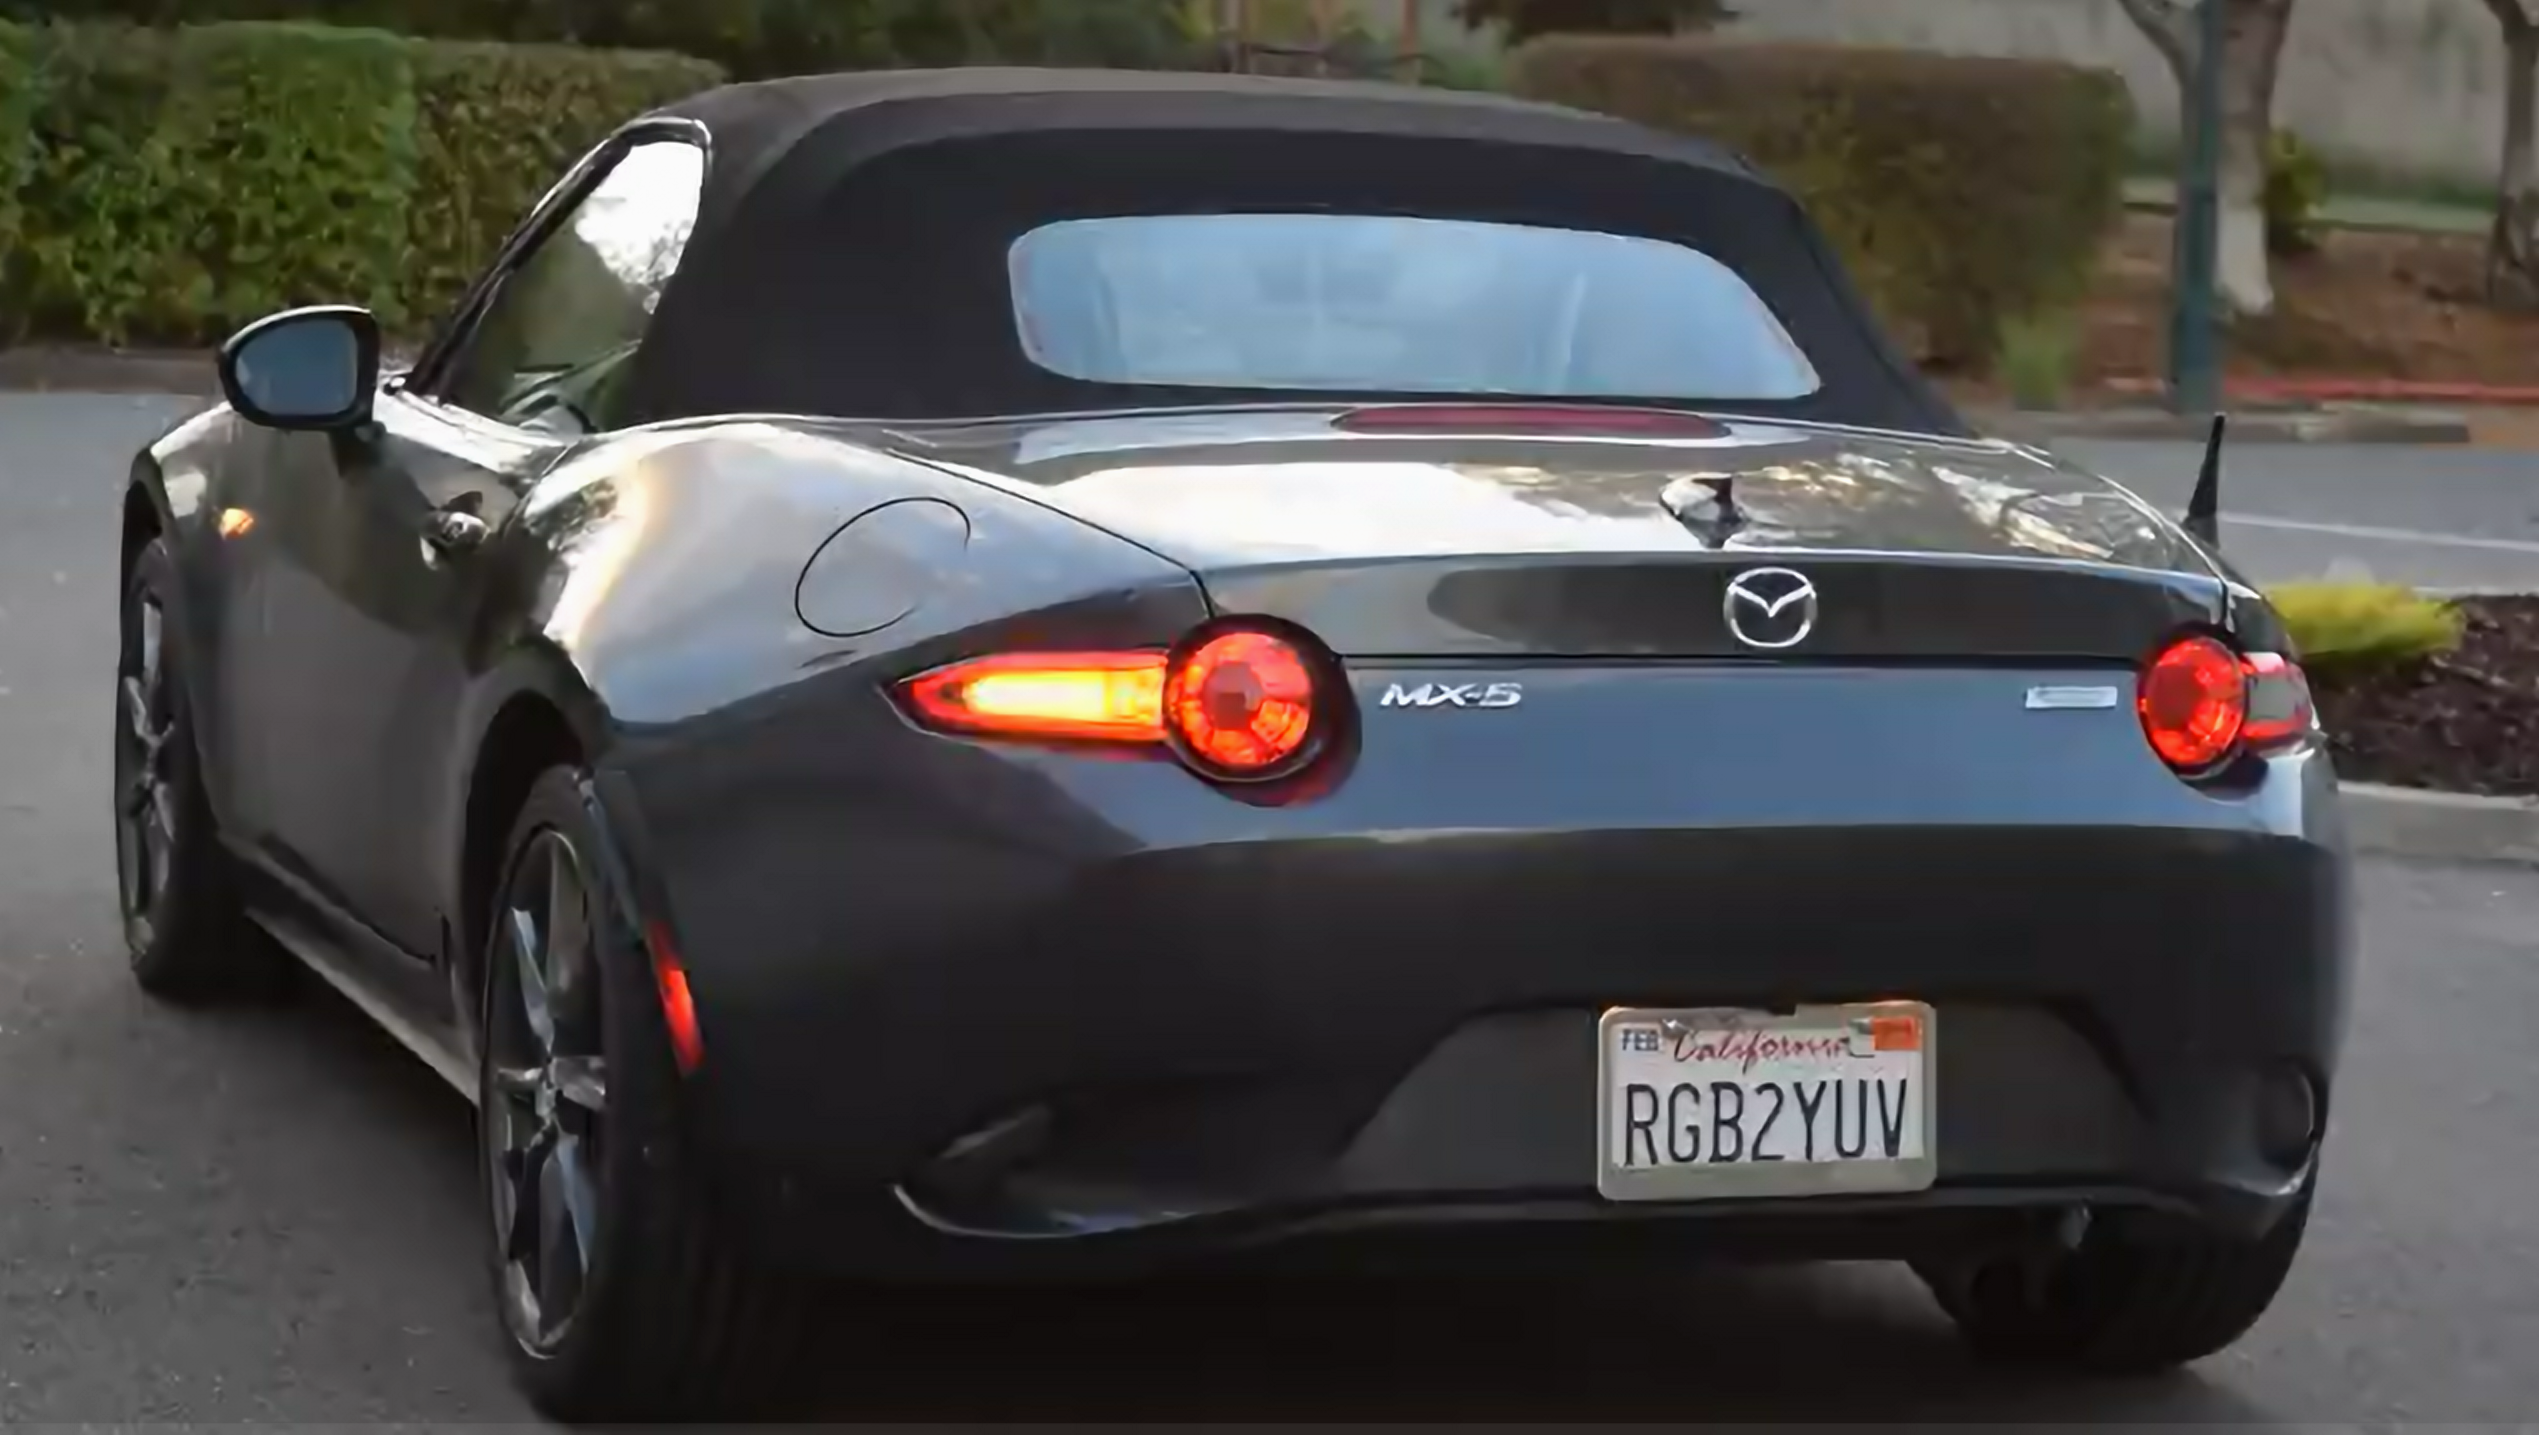 Building An Animated Turn Signal For The Mazda MX-5